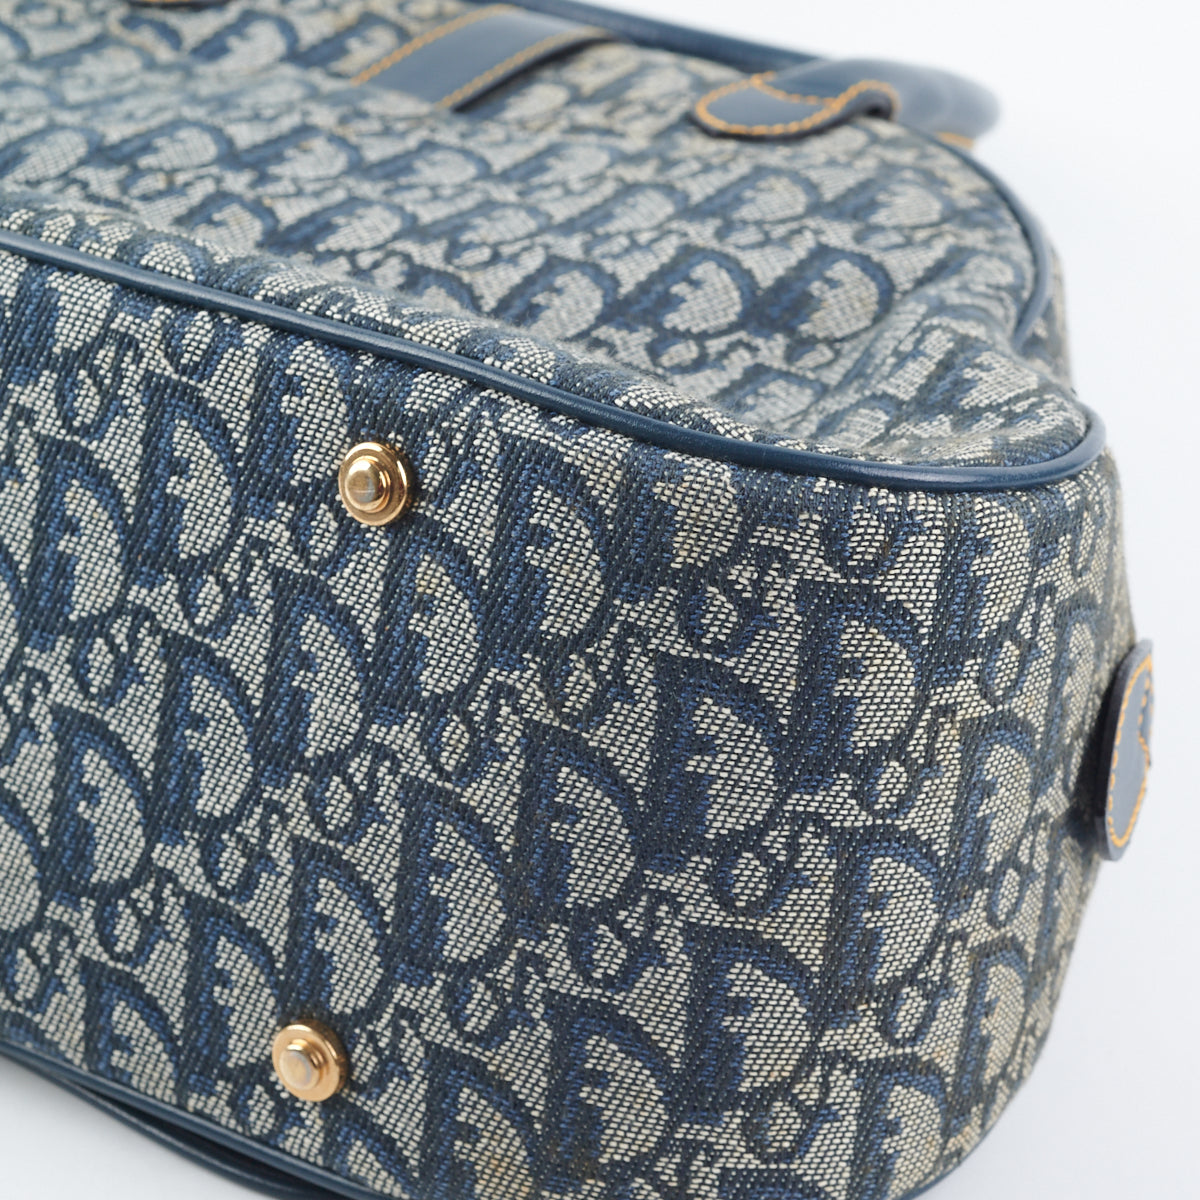 Sold at Auction: CHRISTIAN DIOR Navy Beige Trotter Boston Bag